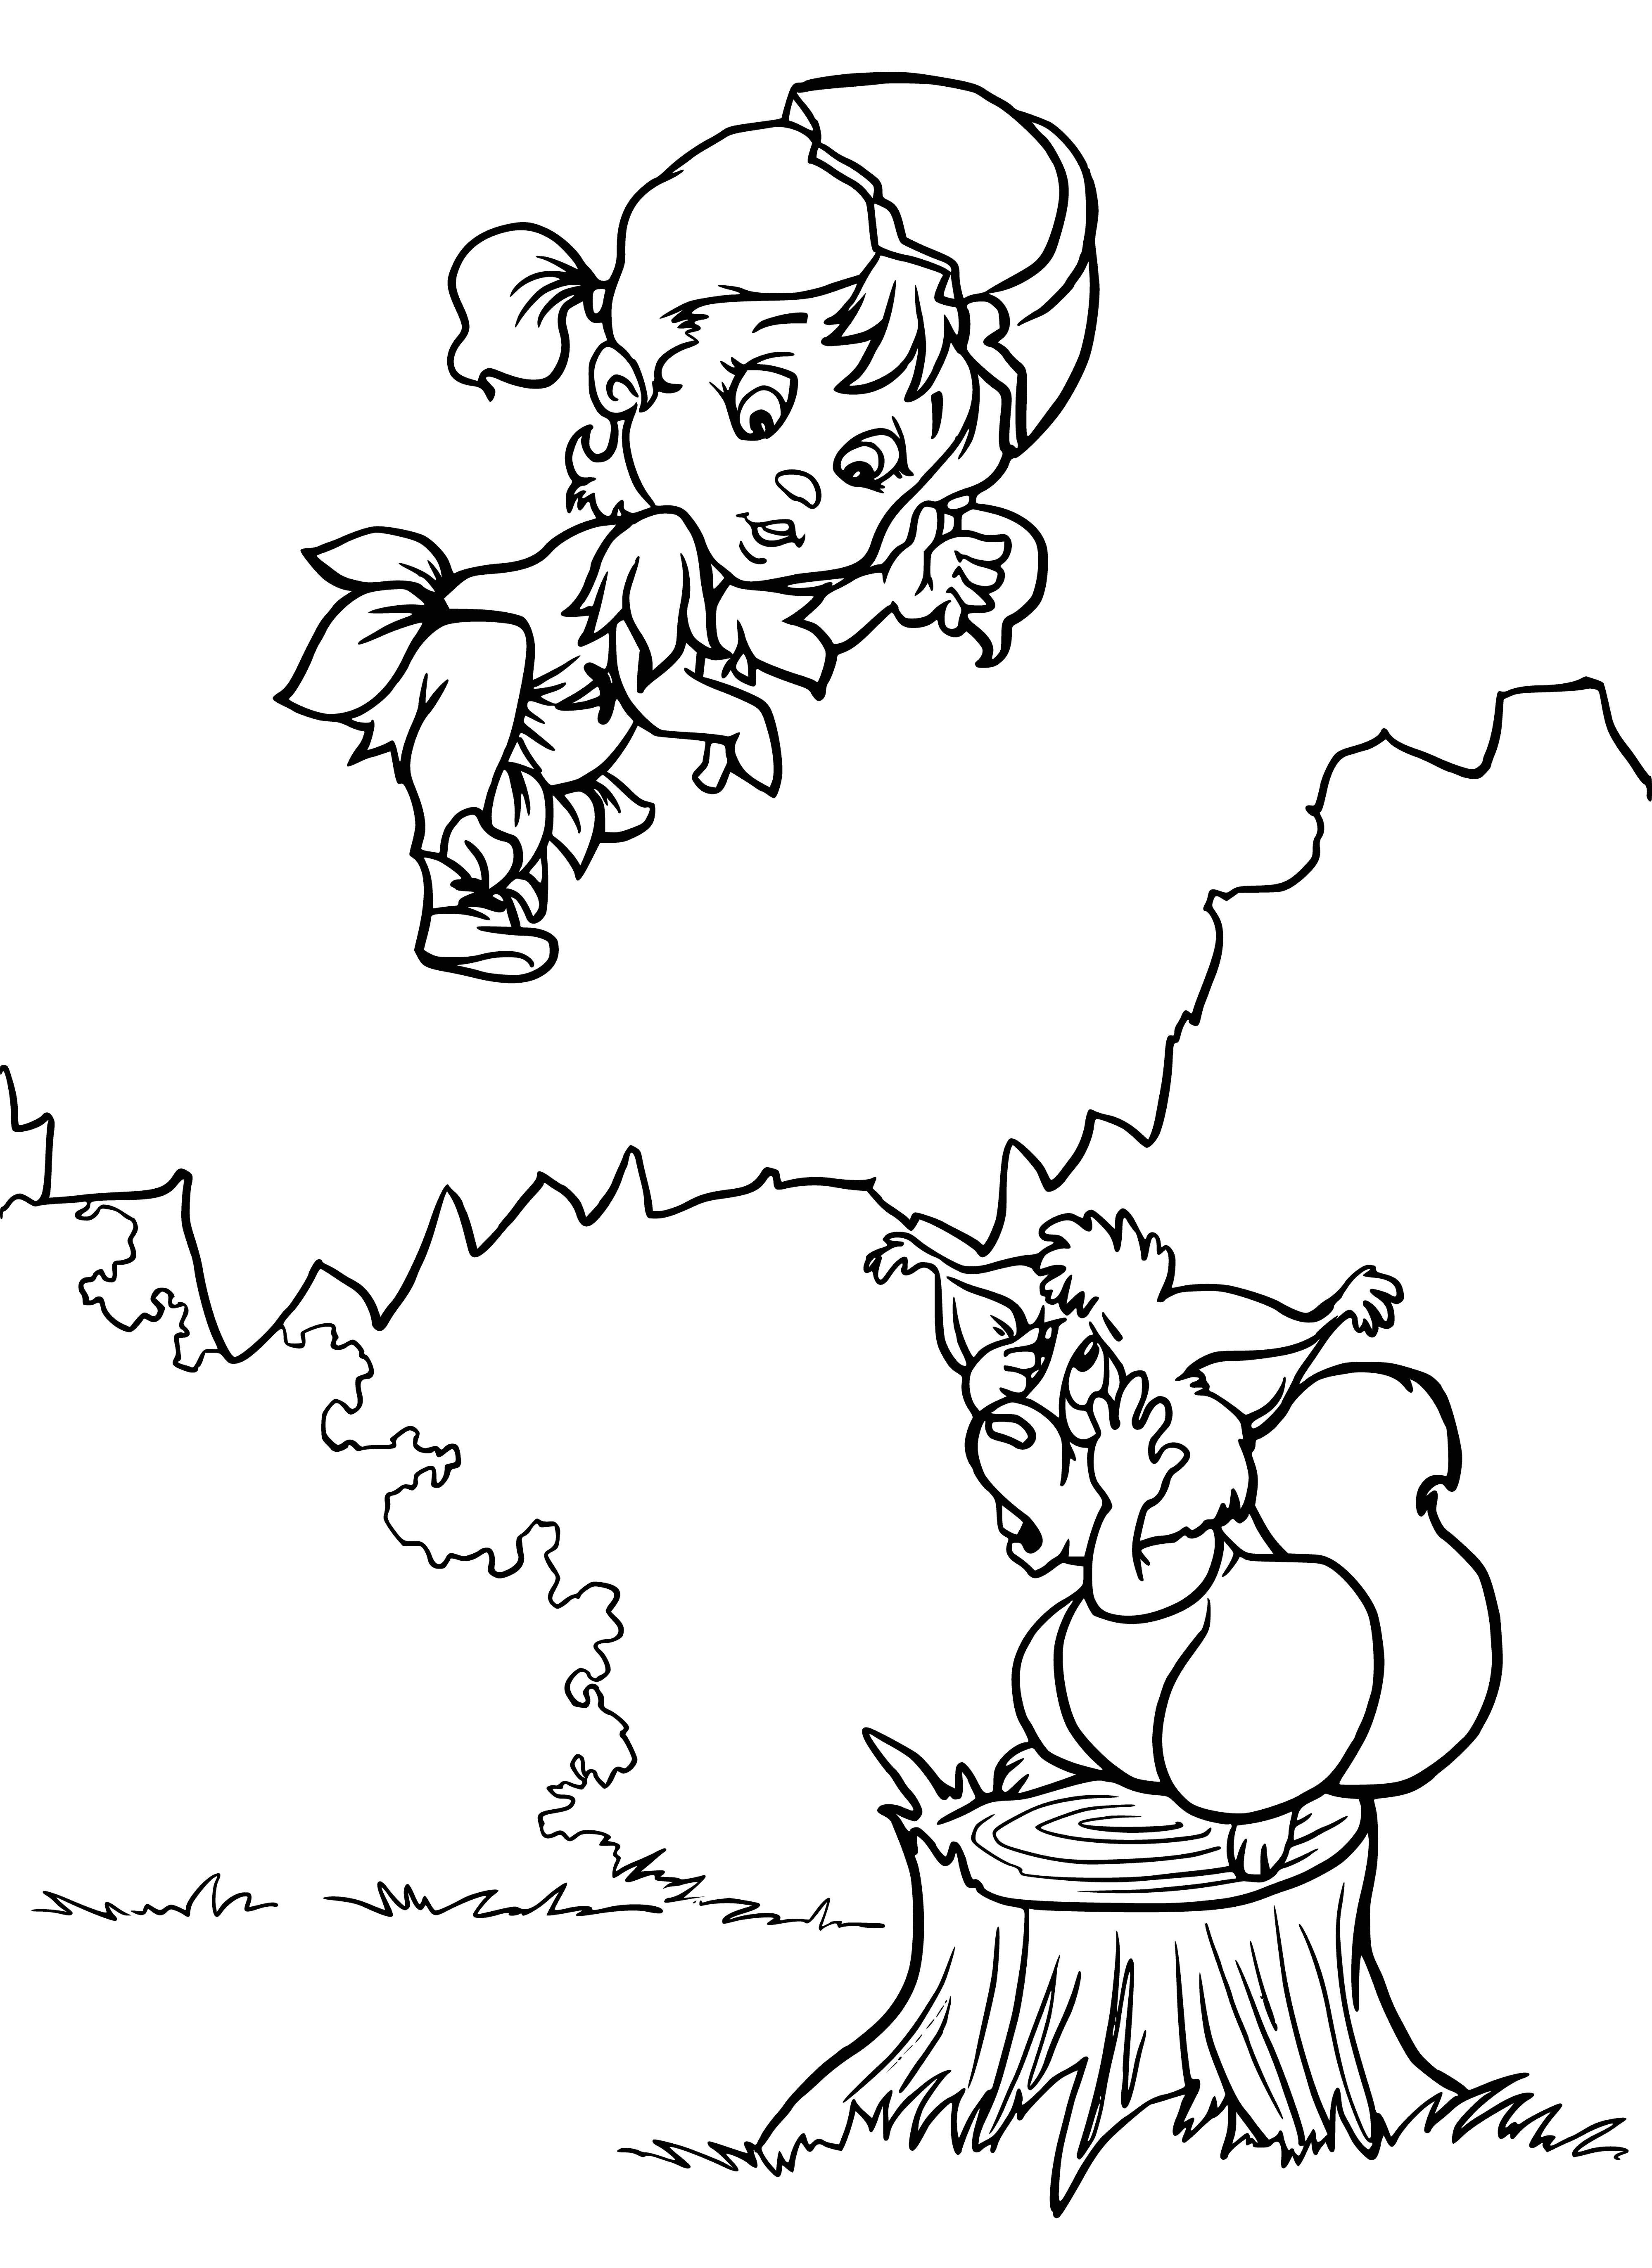 coloring page: Oreshenka & Lily sit on a rock & admire the river below, wearing patterned dresses of light blue & yellow with bare feet.